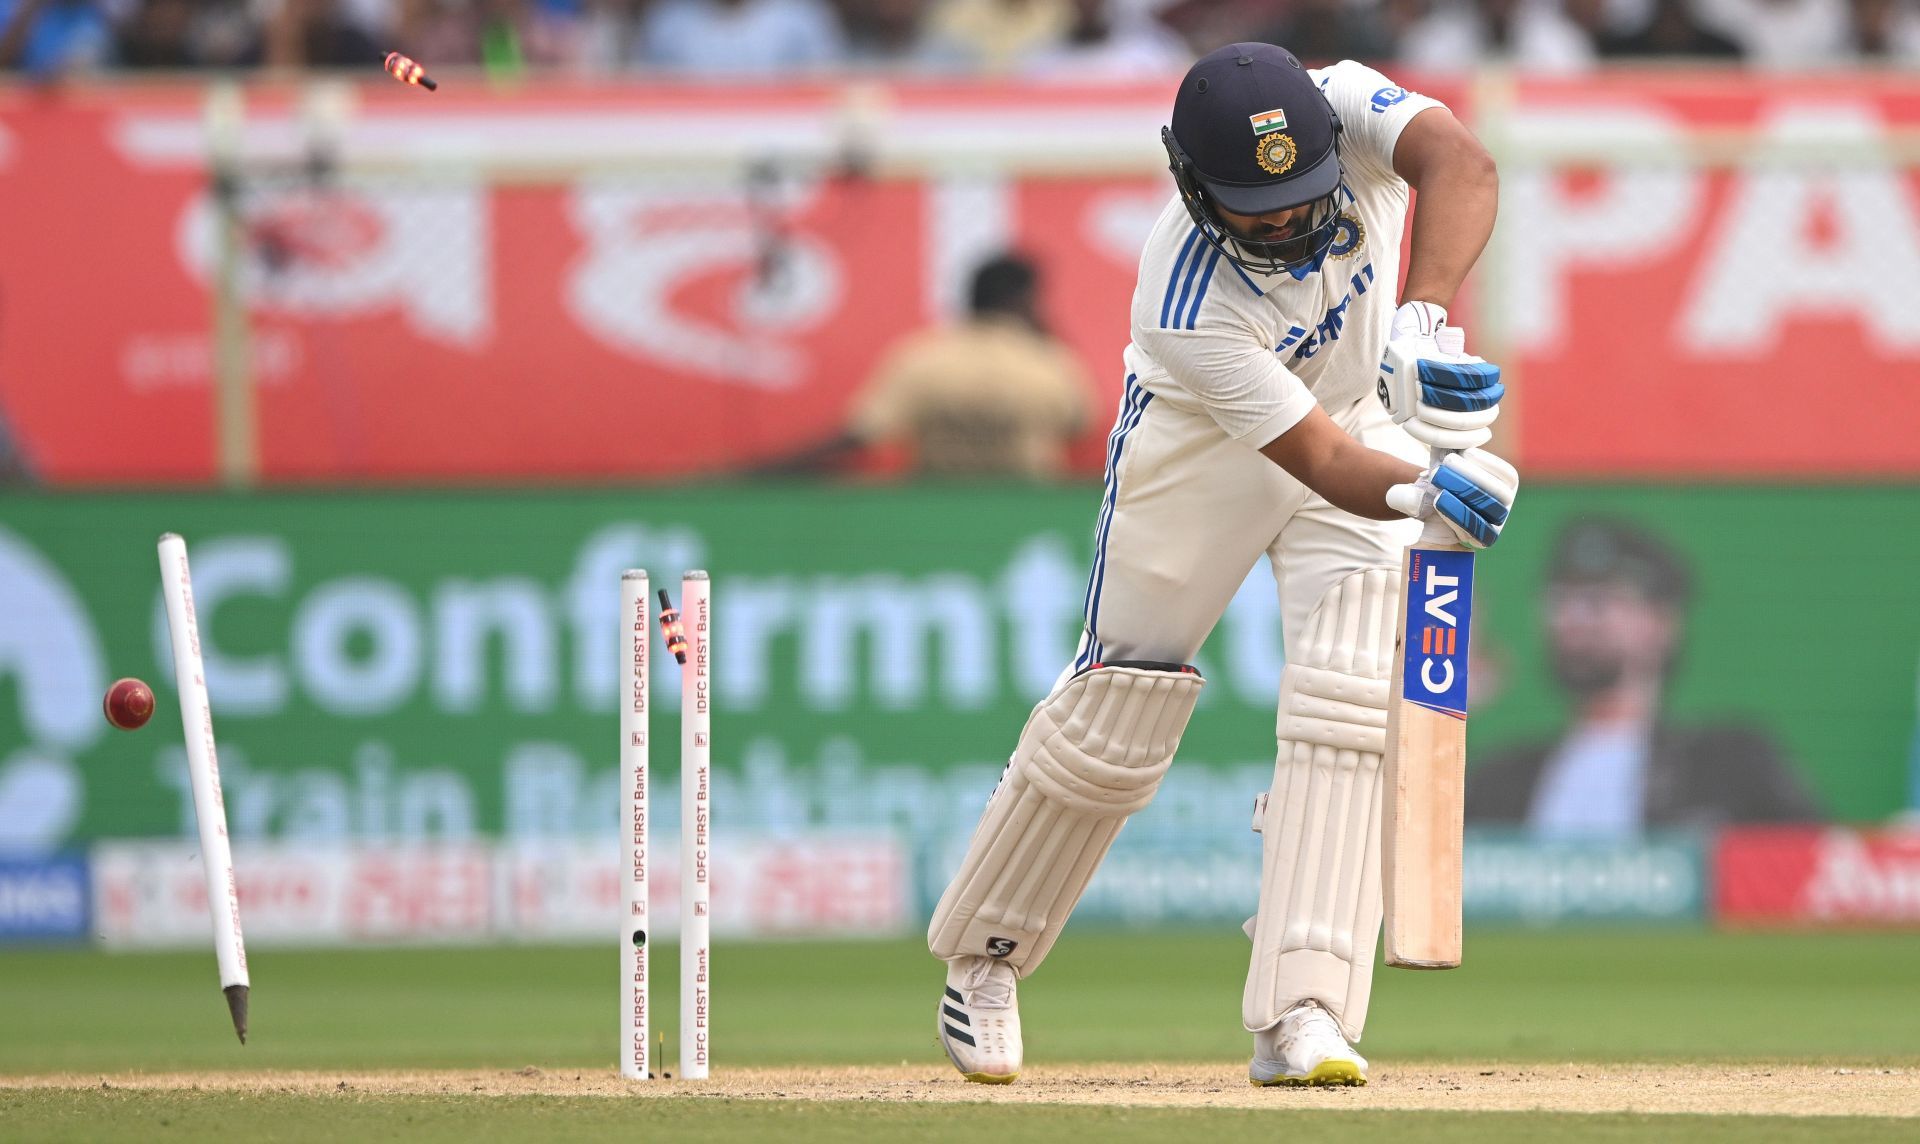 Rohit Sharma failed to play substantial knocks in both innings. [P/C: Getty]